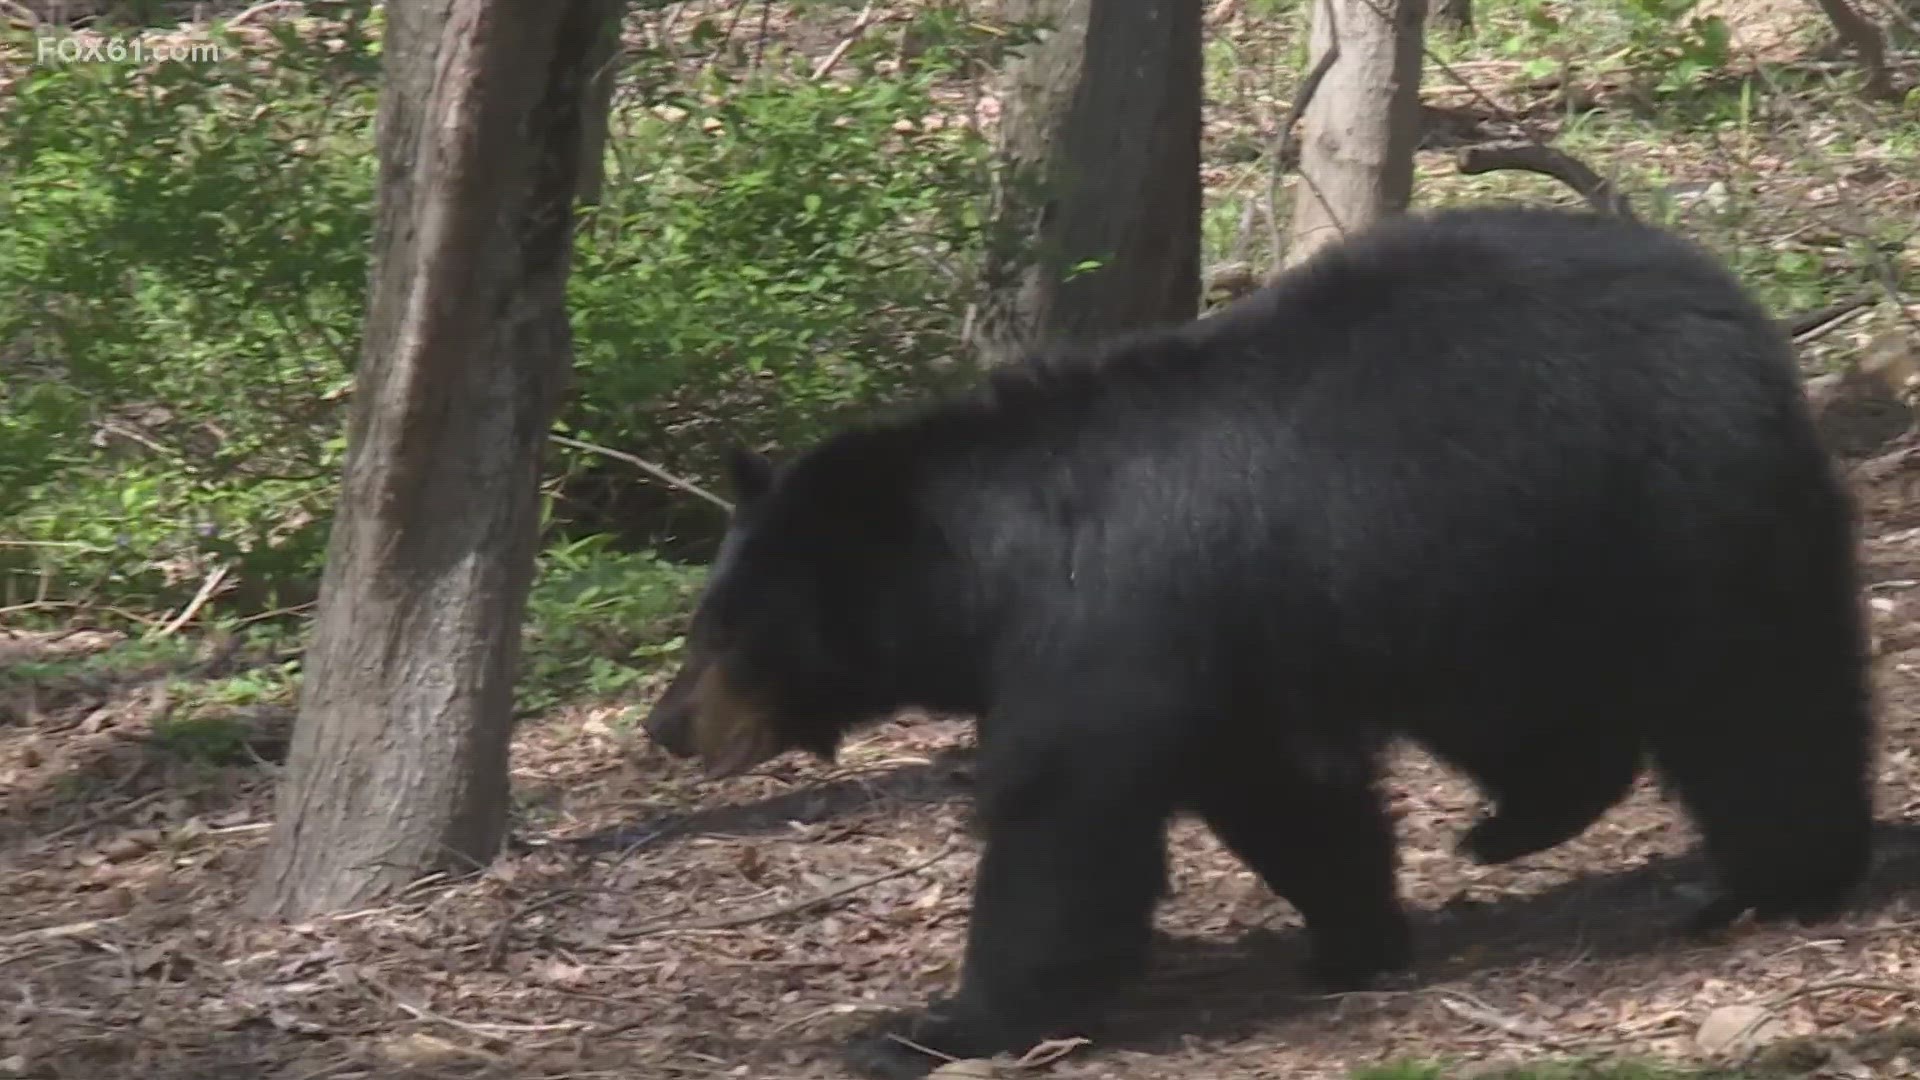 The main concern by many is potentially dangerous interactions between humans and bears.